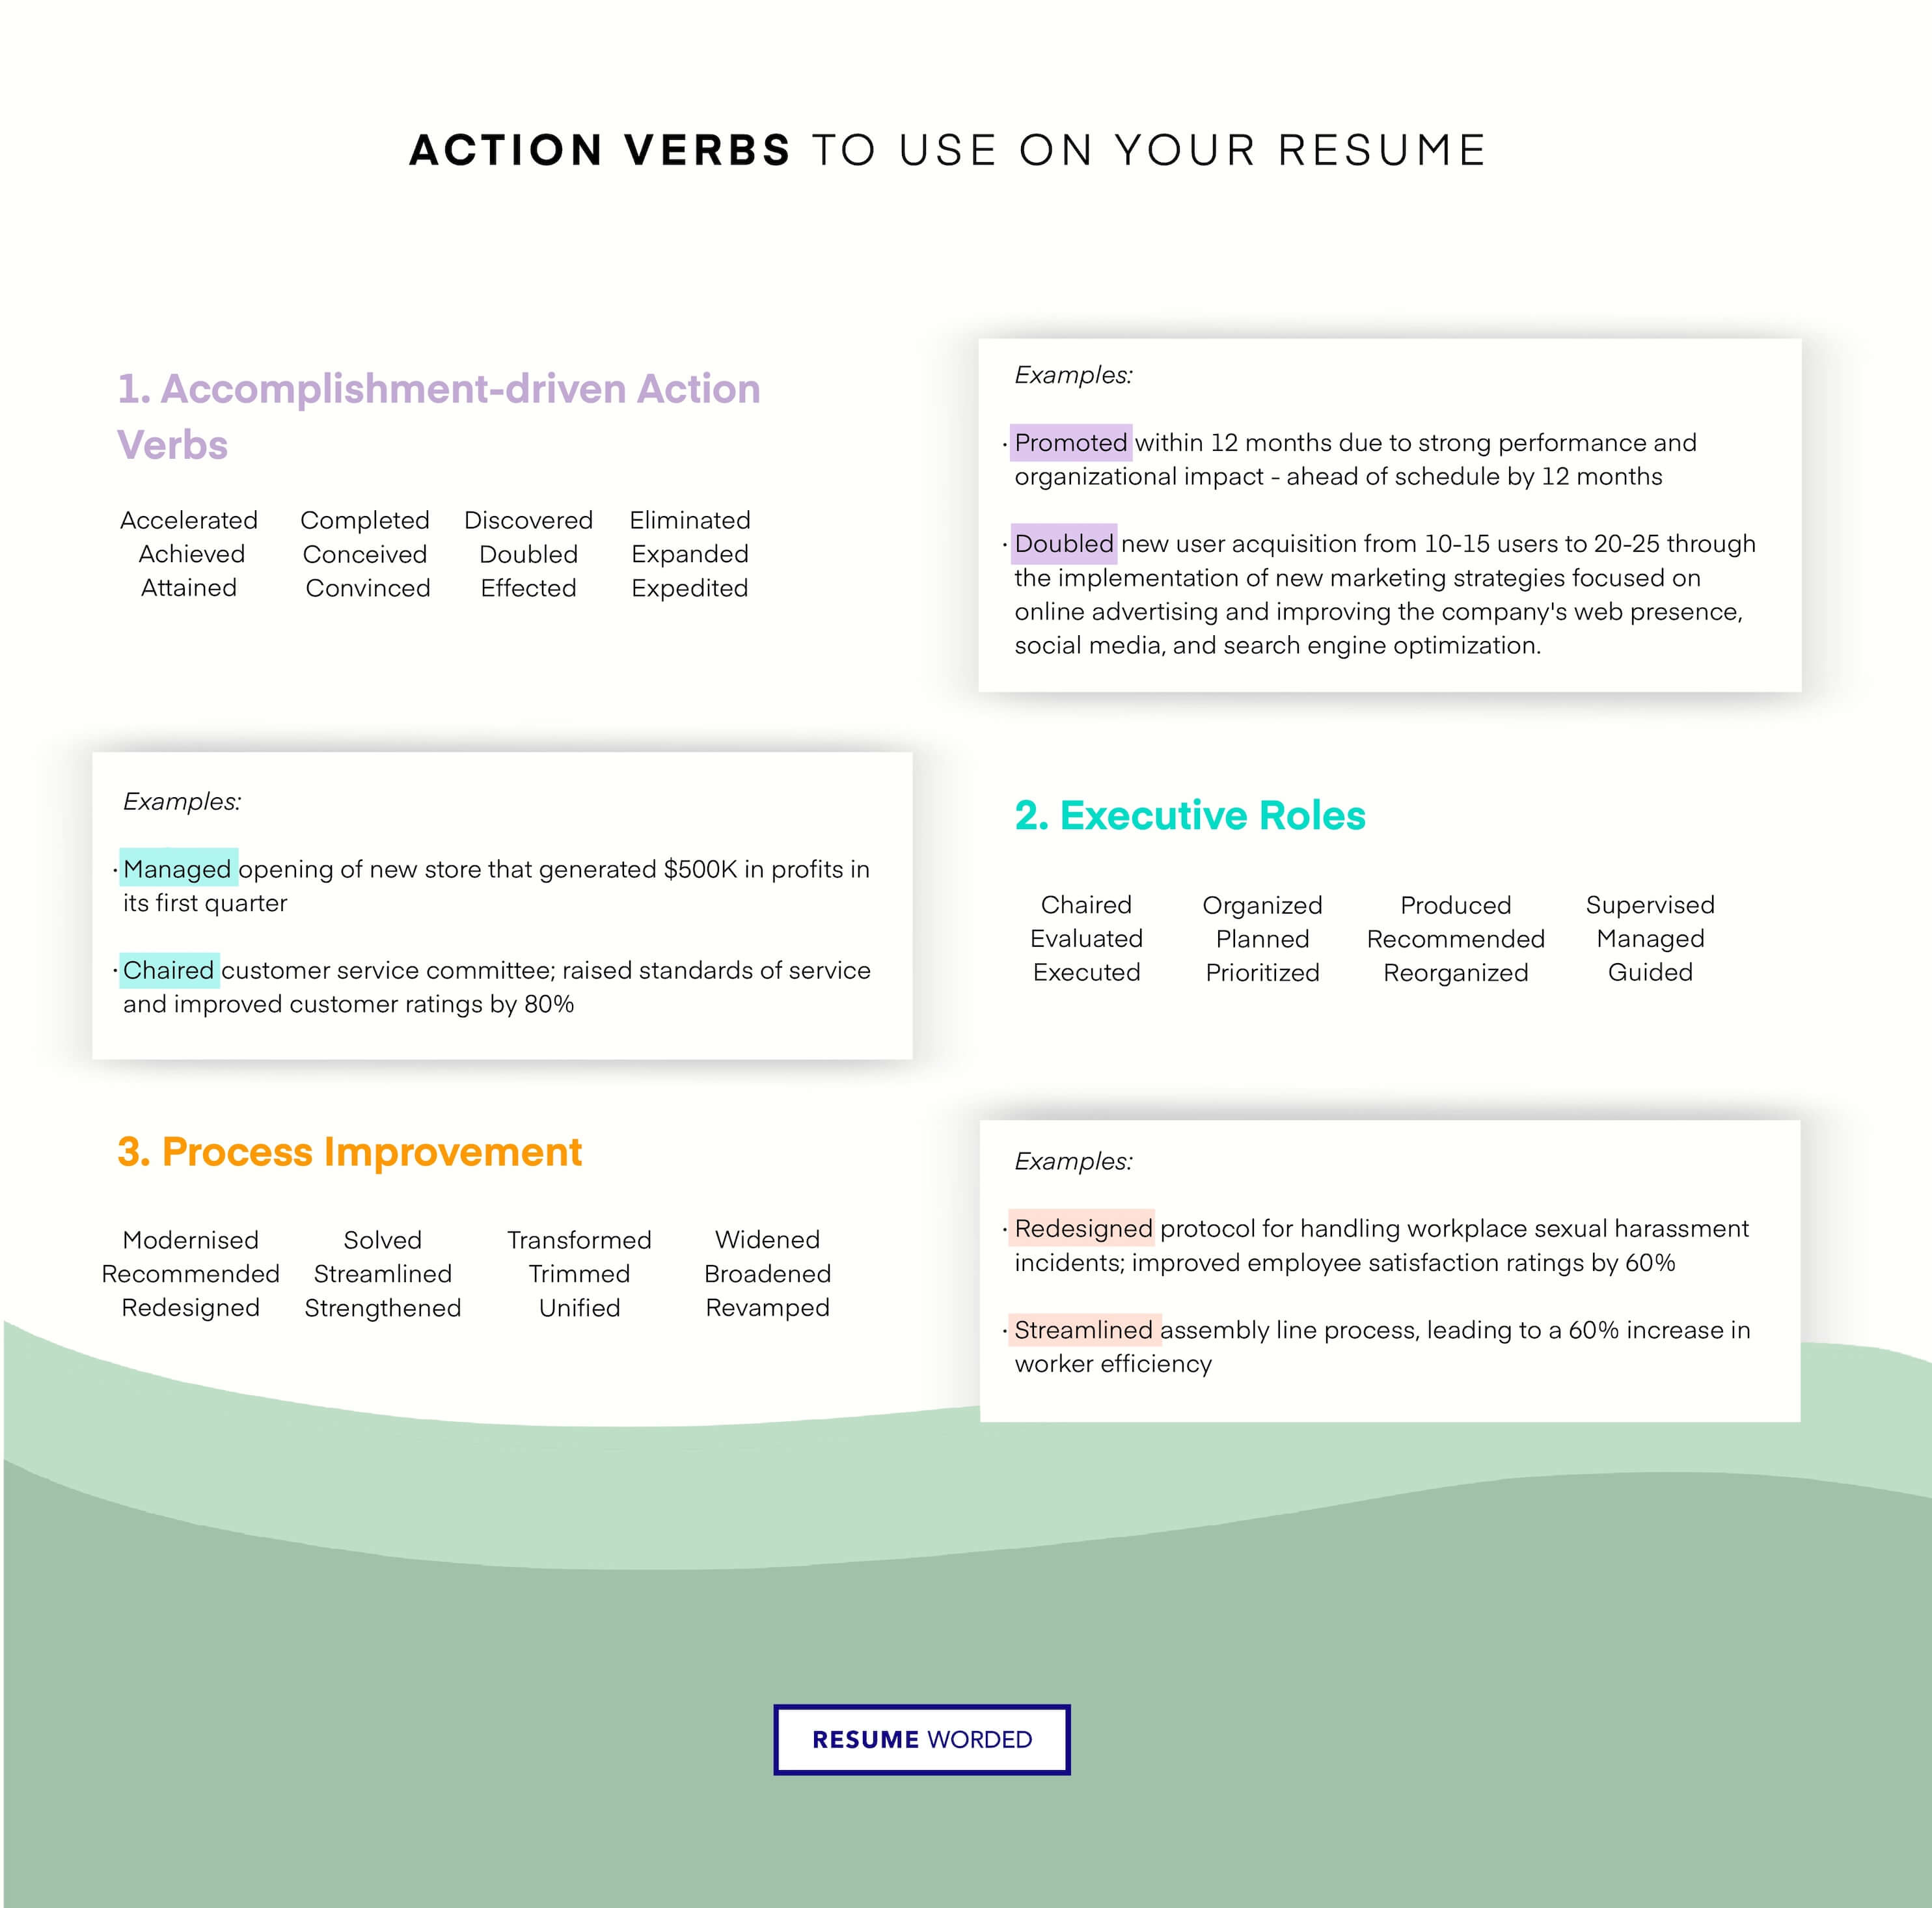 Bullet points feature strong action verbs highlighting graphic design skills - Graphic Designer Resume